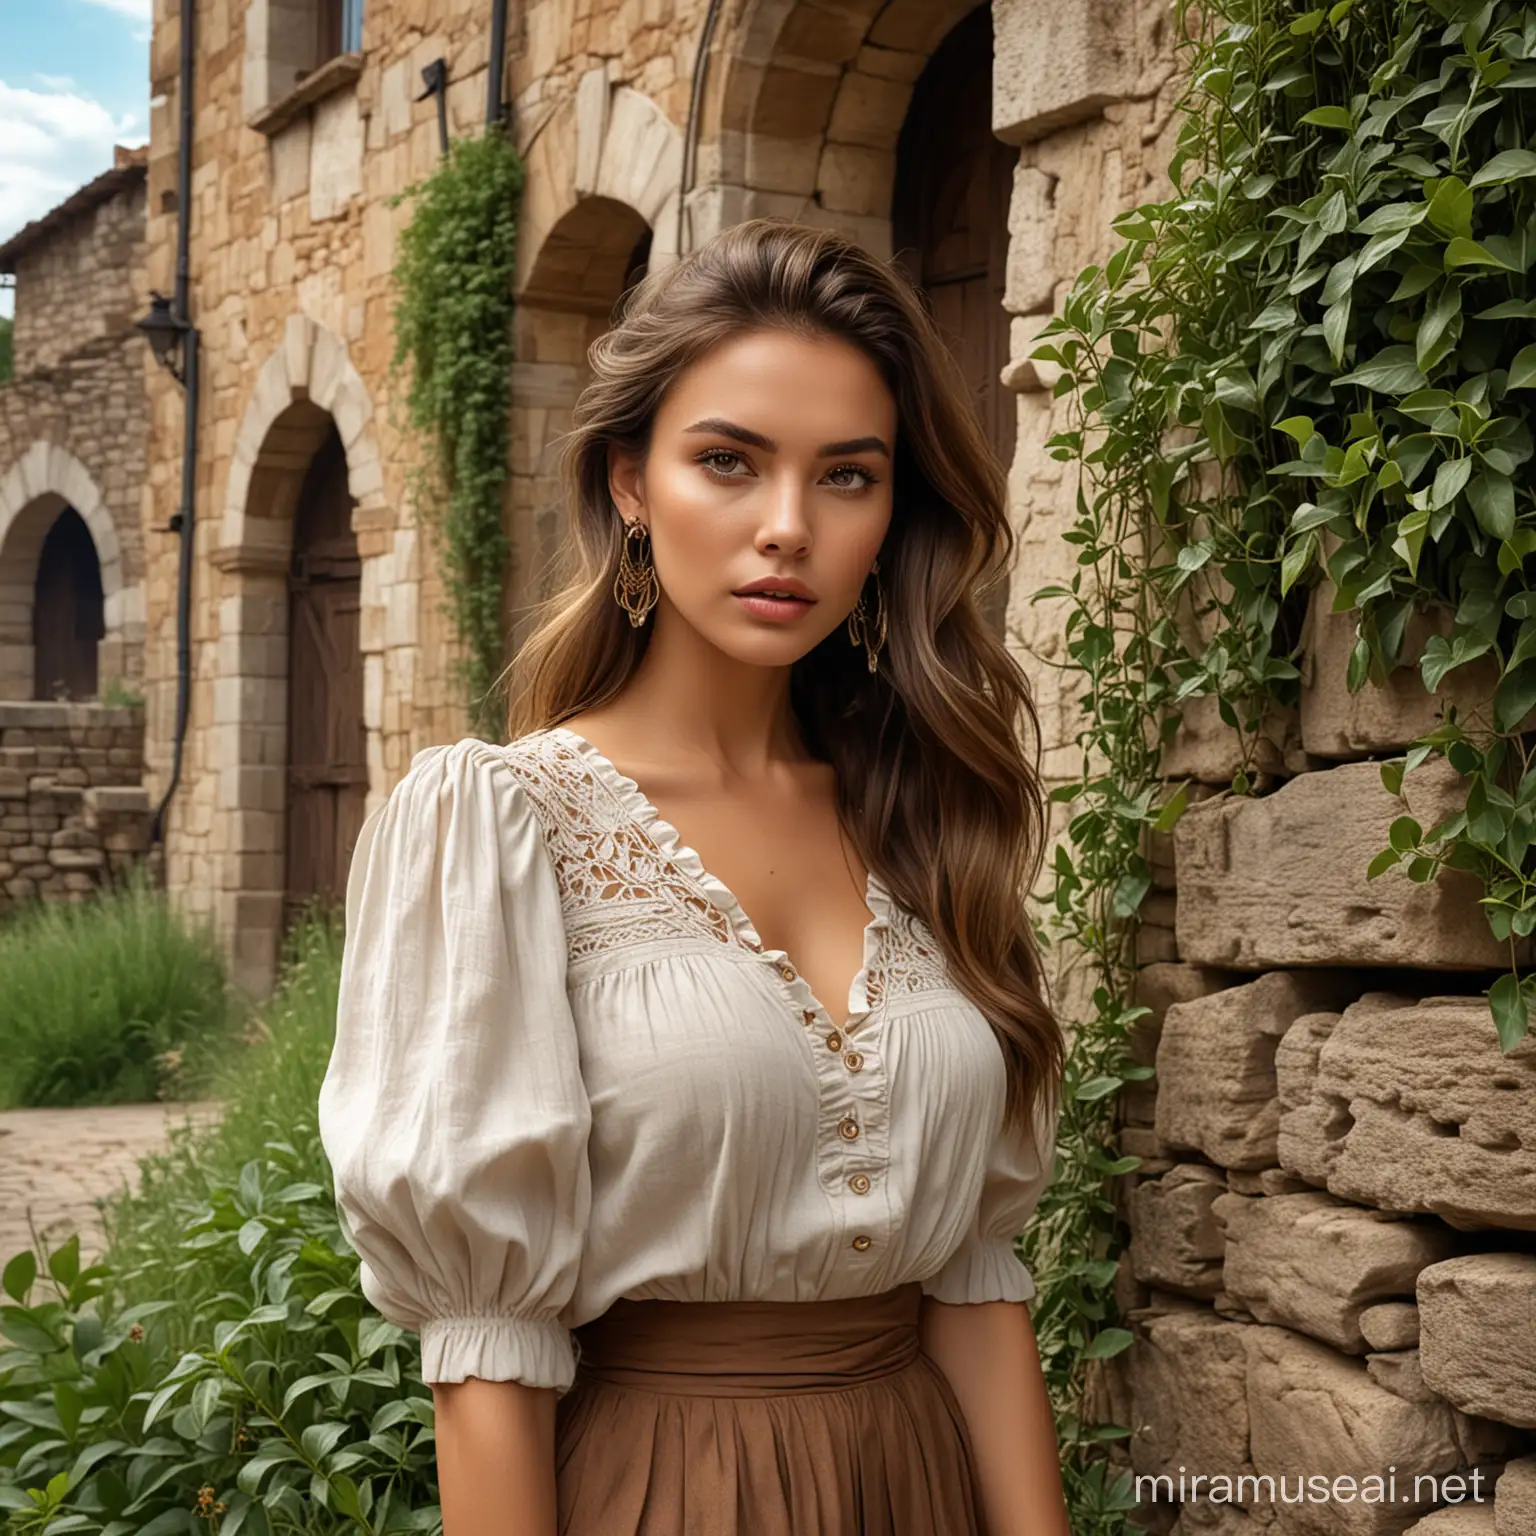 Photo of Woman, heavy make up, brown balayage long hair, blouse, long skirt, gigantic earrings, high quality, photorealistic, ultra realistic, outdoor, old stone buildings, wild nature, A wall overgrown with vegetation, plants on walls